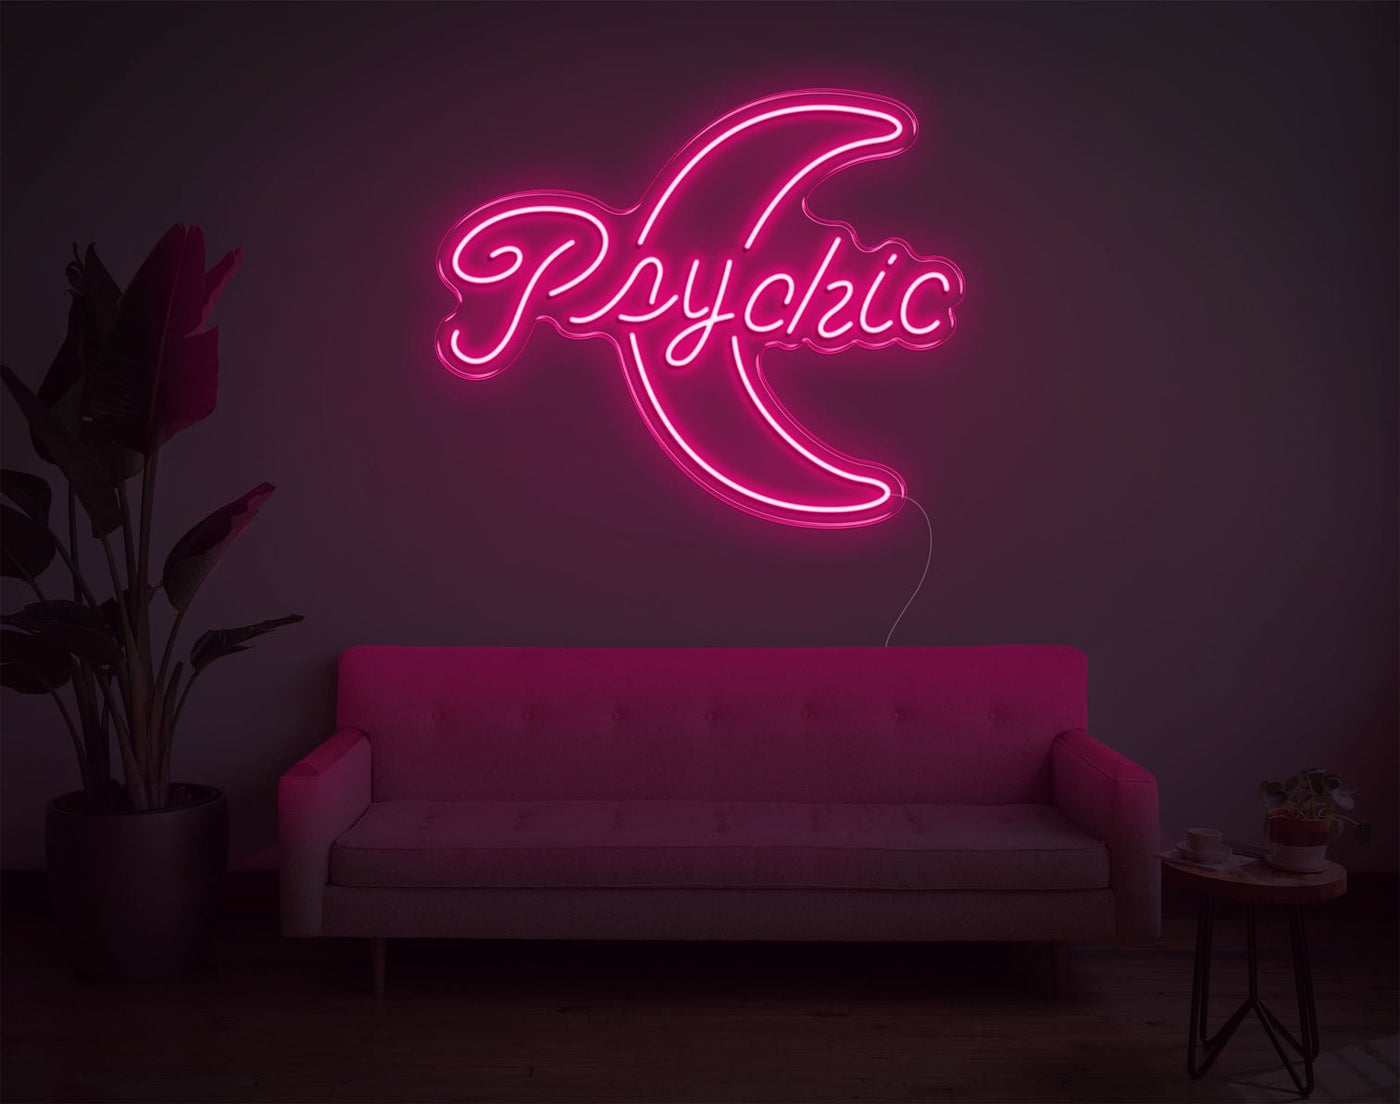 Psychic Moon LED Neon Sign - 23inch x 28inchLight Pink